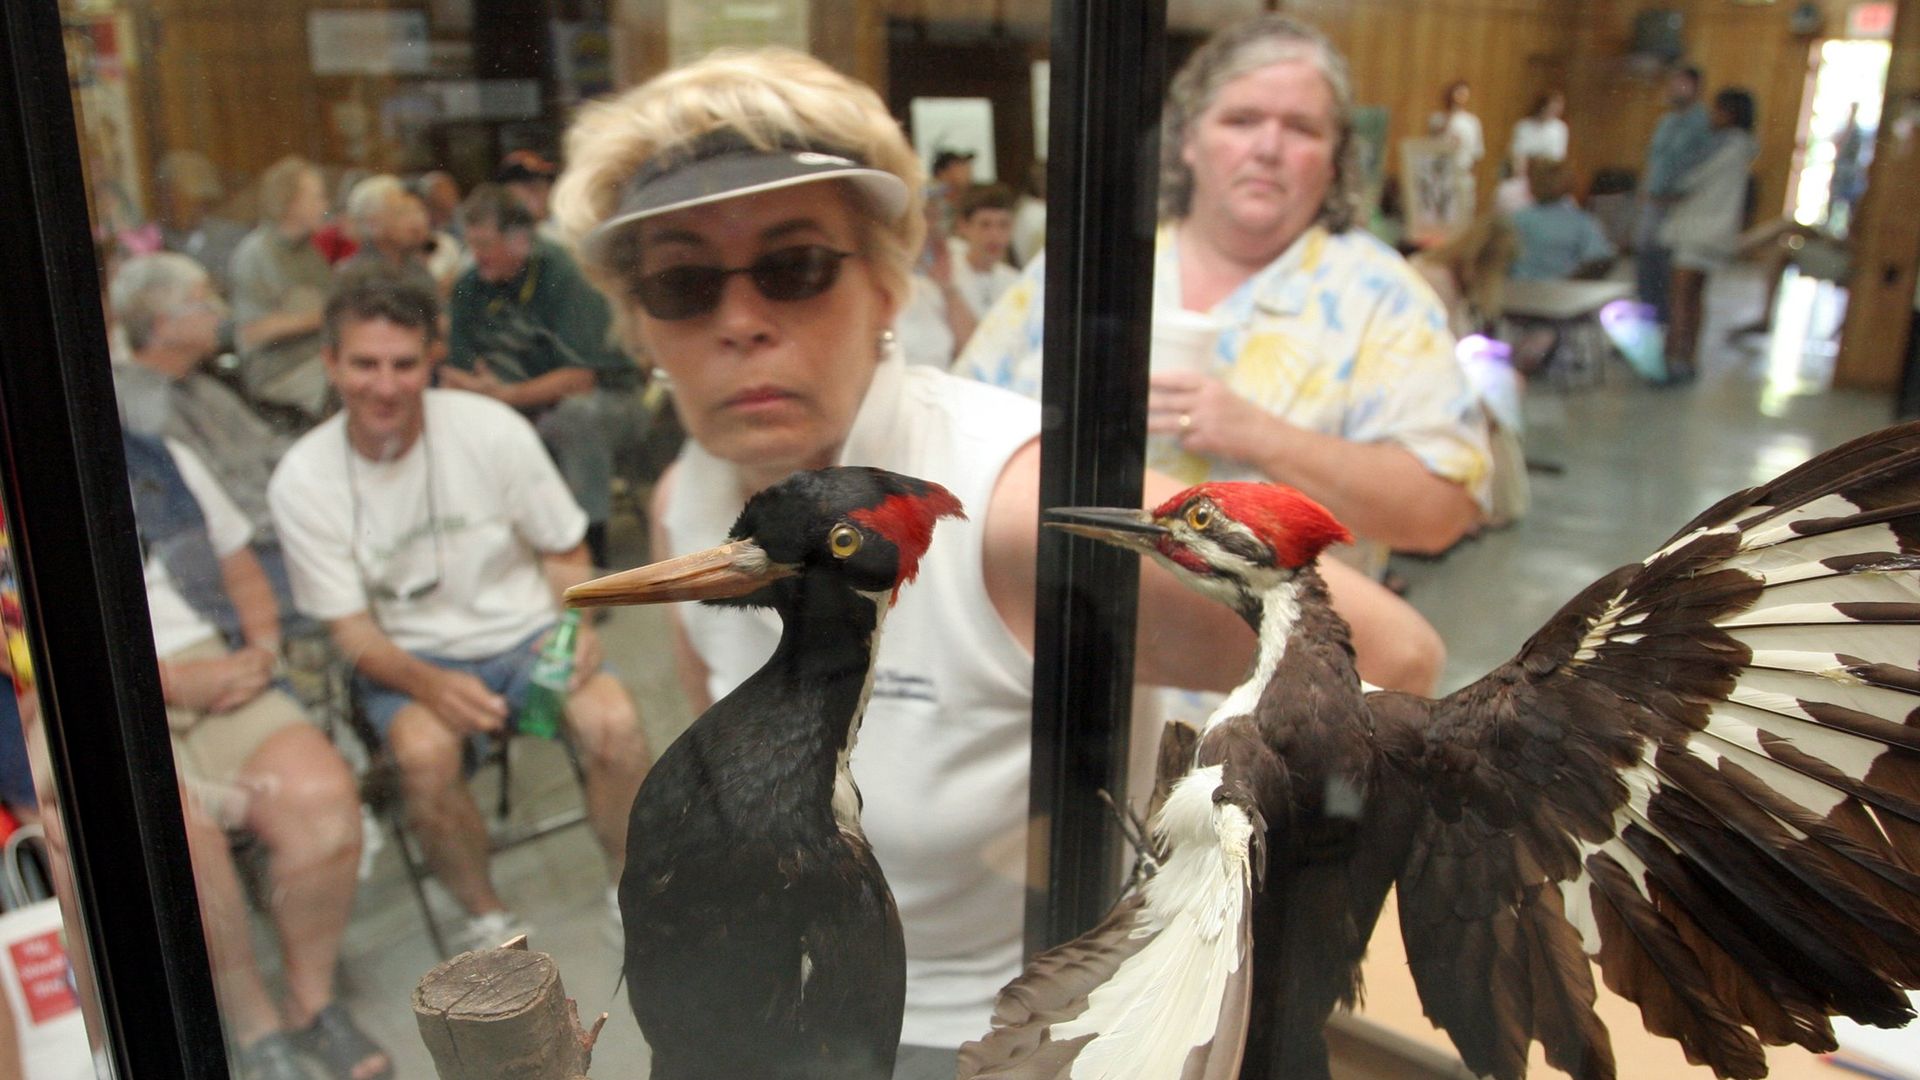 People looking at a stuffed Ivory-billed woodpecker (left) in a glass case in Clarendon, Arkansas, in May 2005.